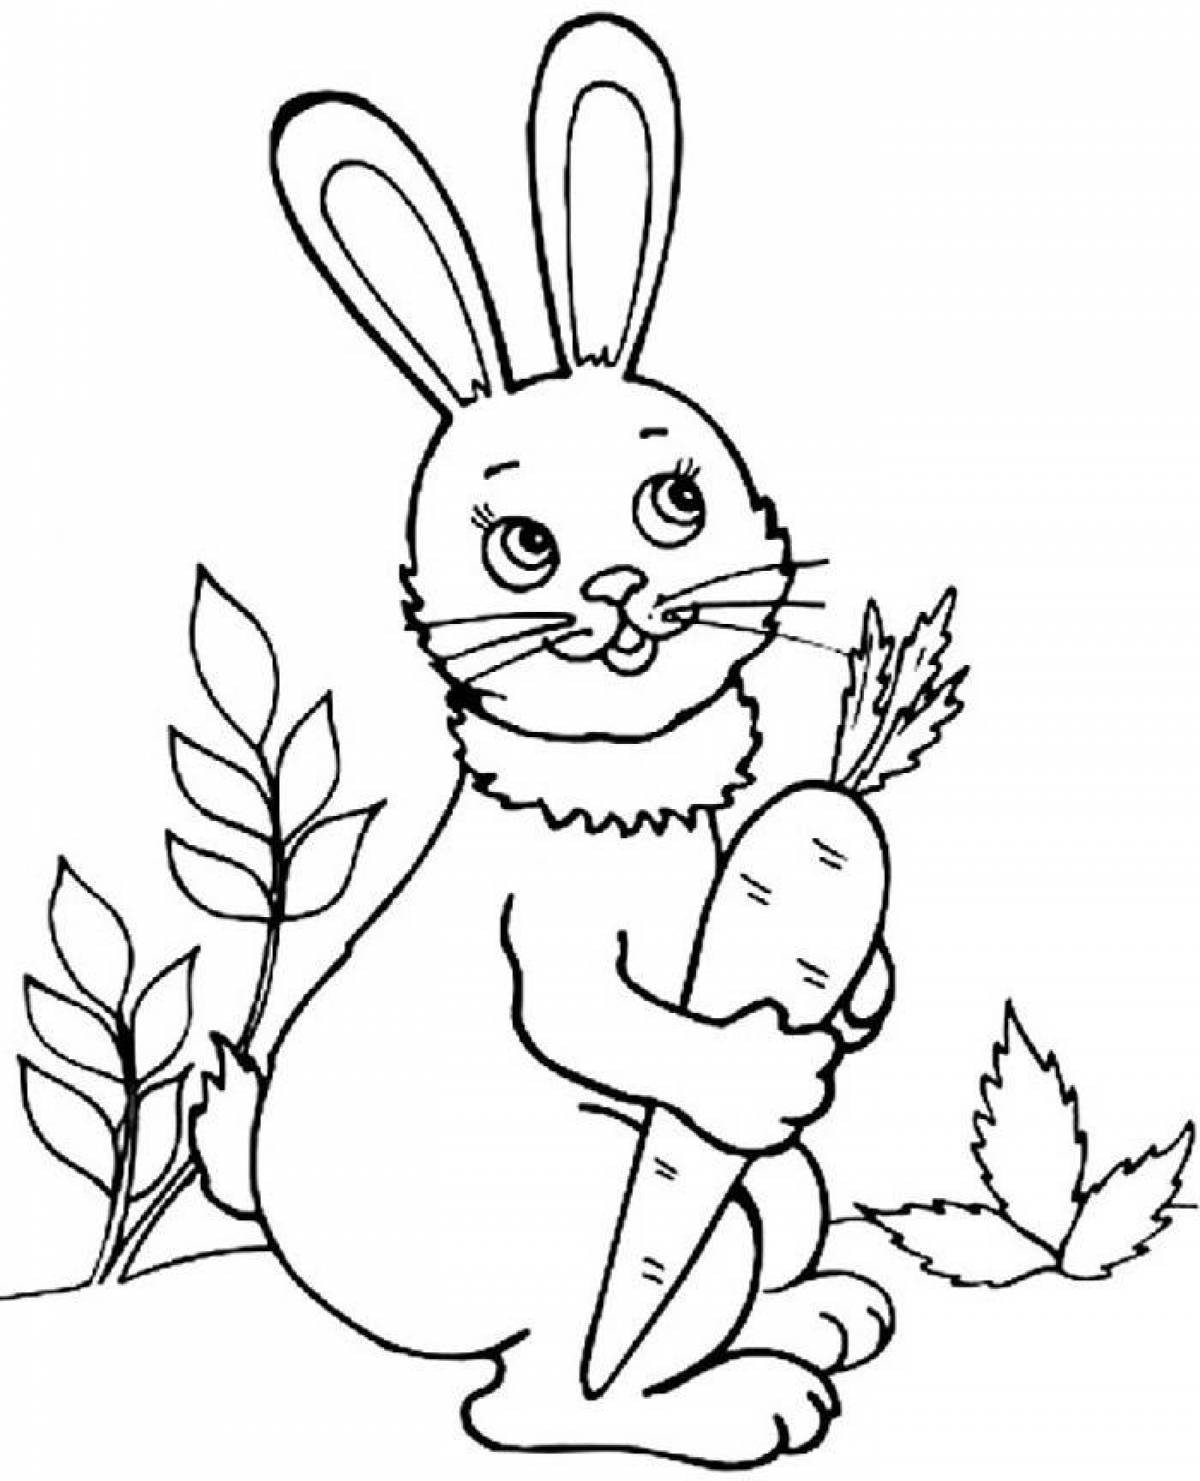 Shiny hare coloring book for kids